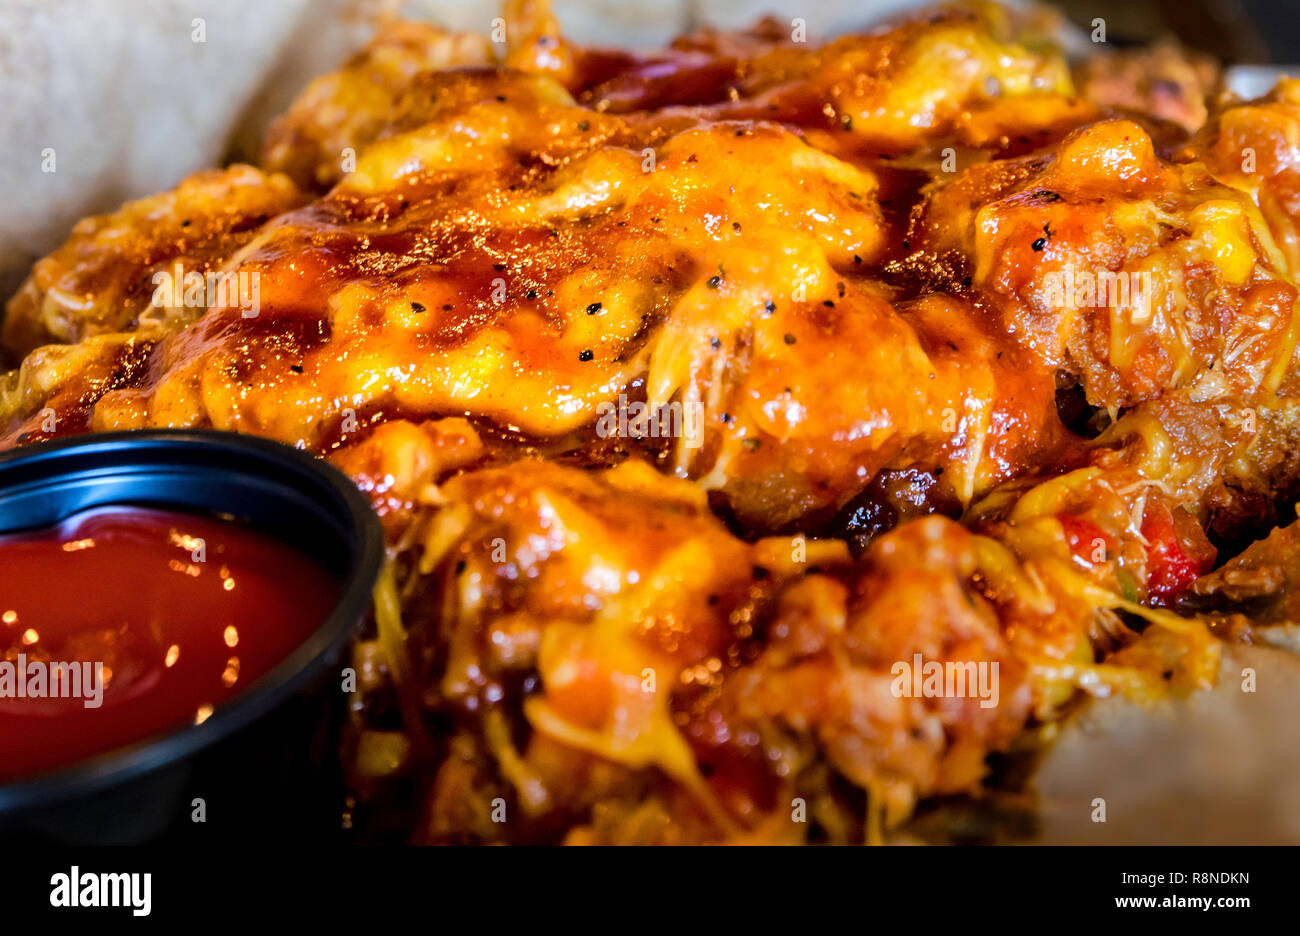 The 'tot stack' at The Local No. 7 in downtown Tucker, Georgia features golden brown tater tots topped with Brunswick stew and cheddar cheese. Stock Photo